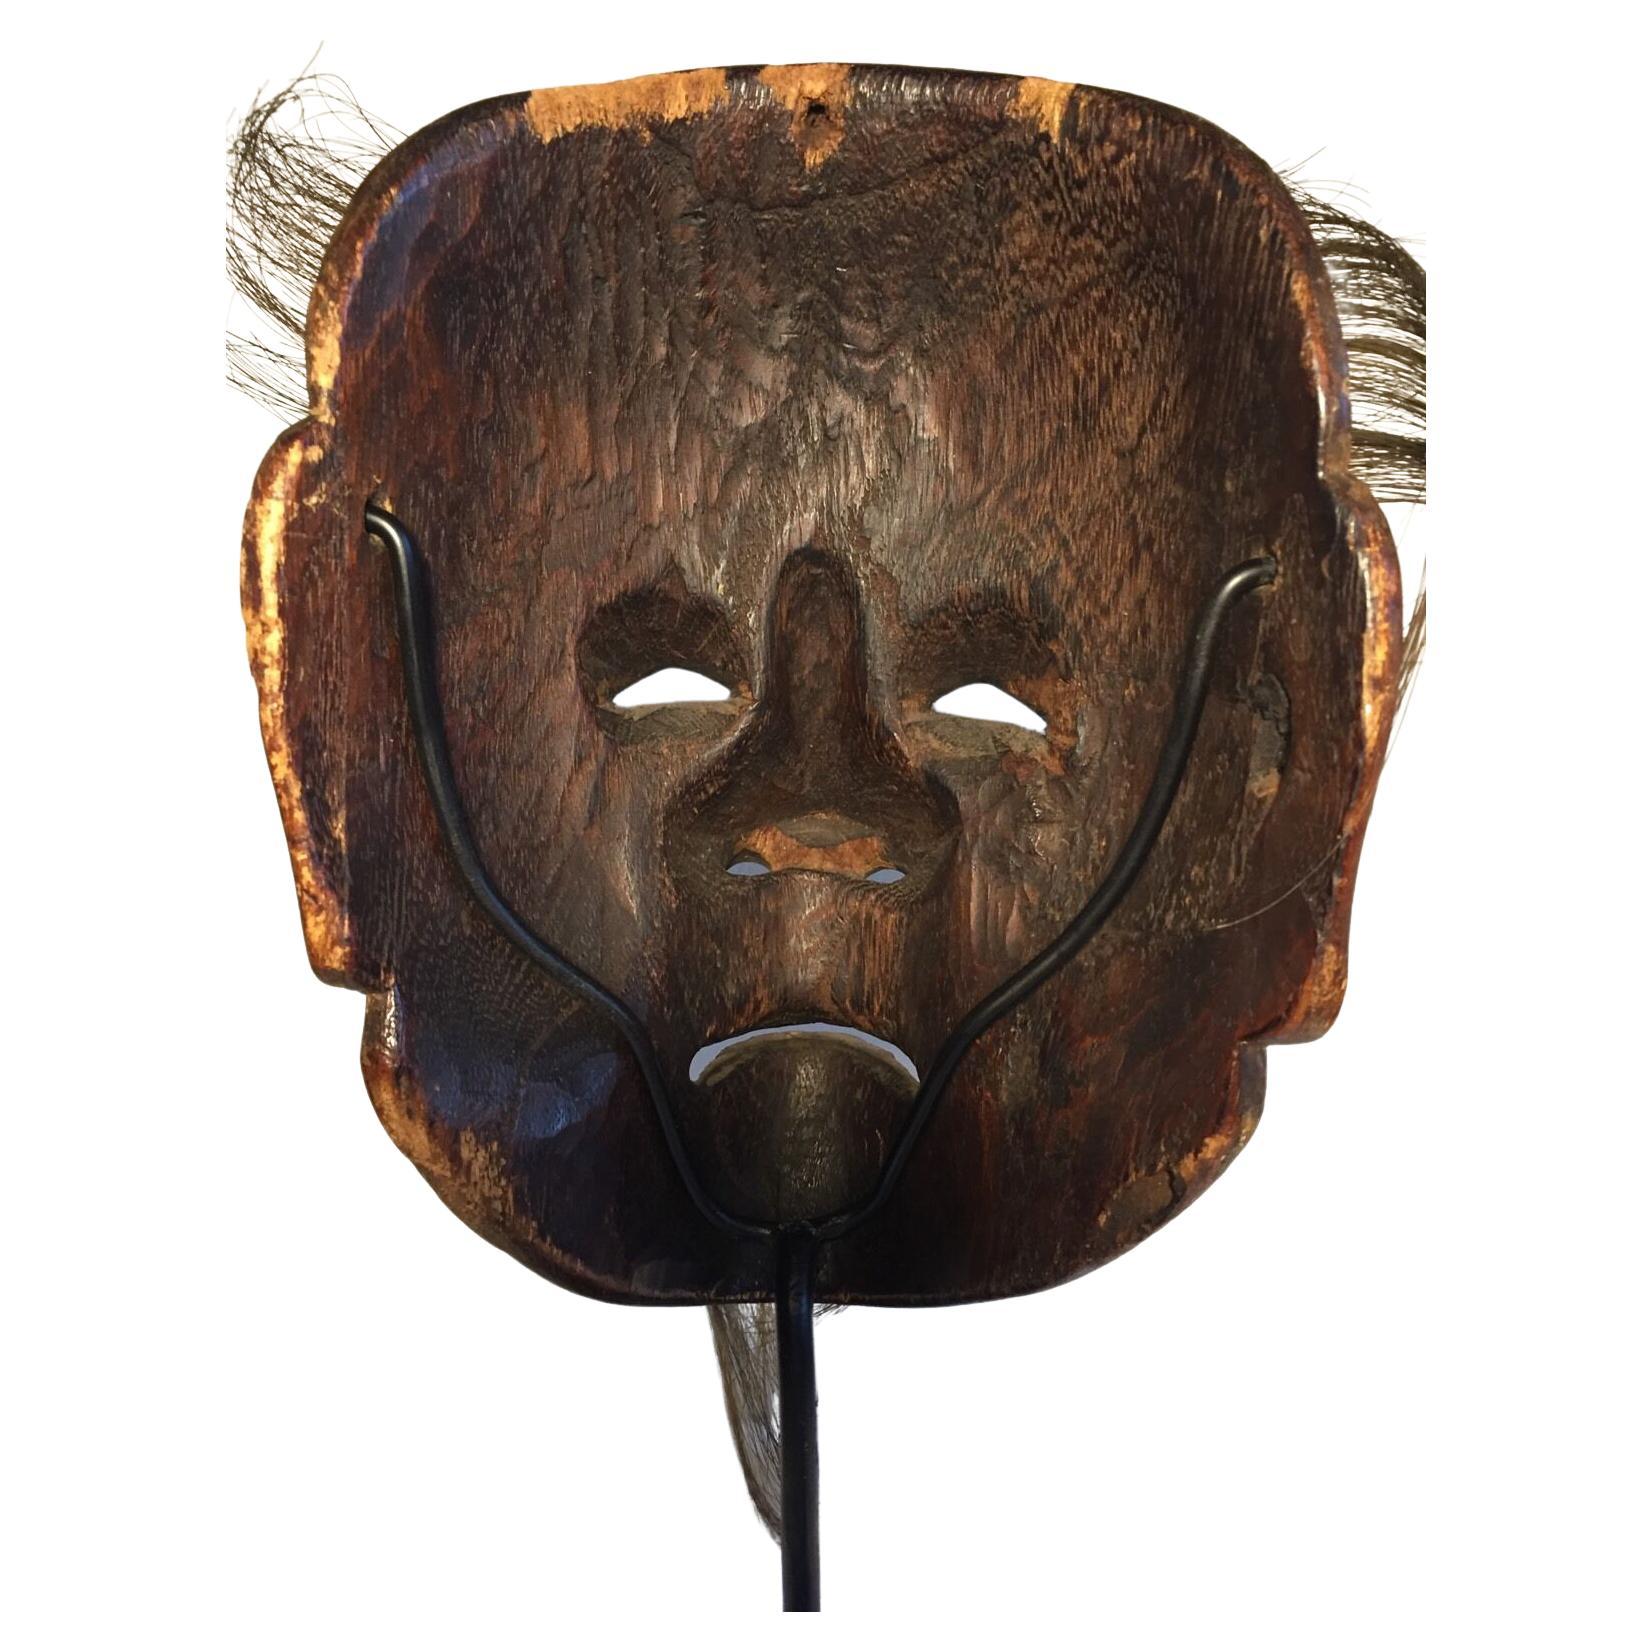 • Antique 17th cent., Noh mask
• Evidence of wearing and noticeable patina
• Ergonomic, right sized to be worn
• Notable rubbing where strings once attached 
• Horse hair
• 